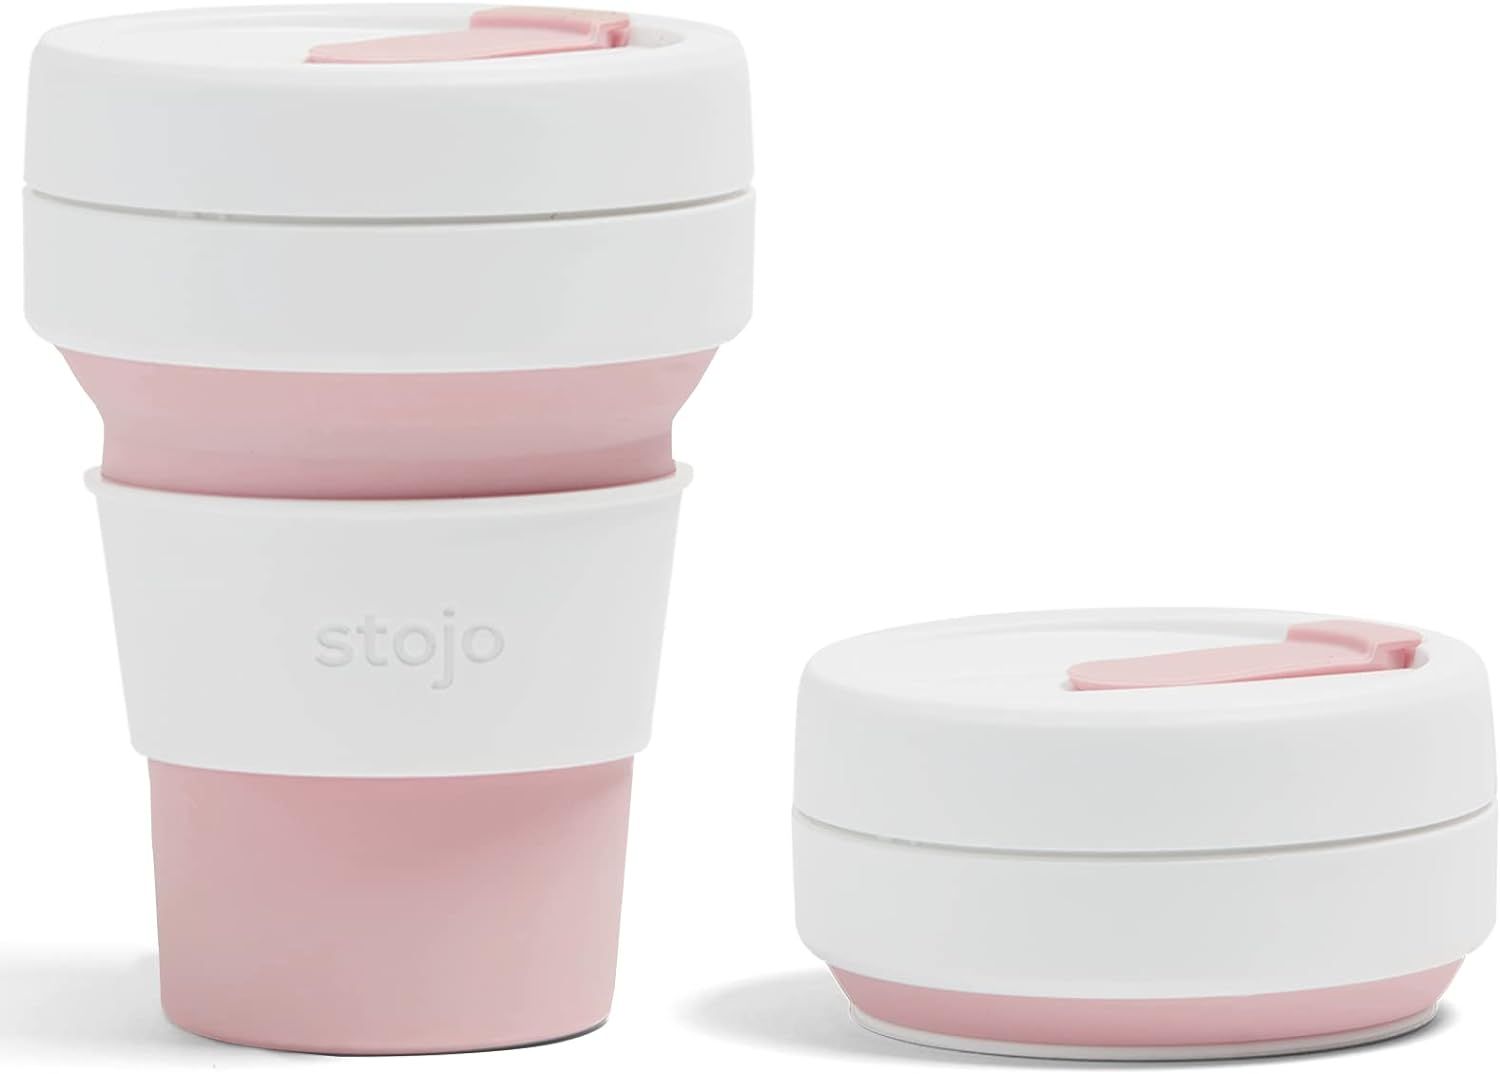 Stojo Collapsible Travel Cup - Rose, 12oz / 355ml - Reusable To-Go Pocket Size Silicone Cup for H... | Amazon (US)